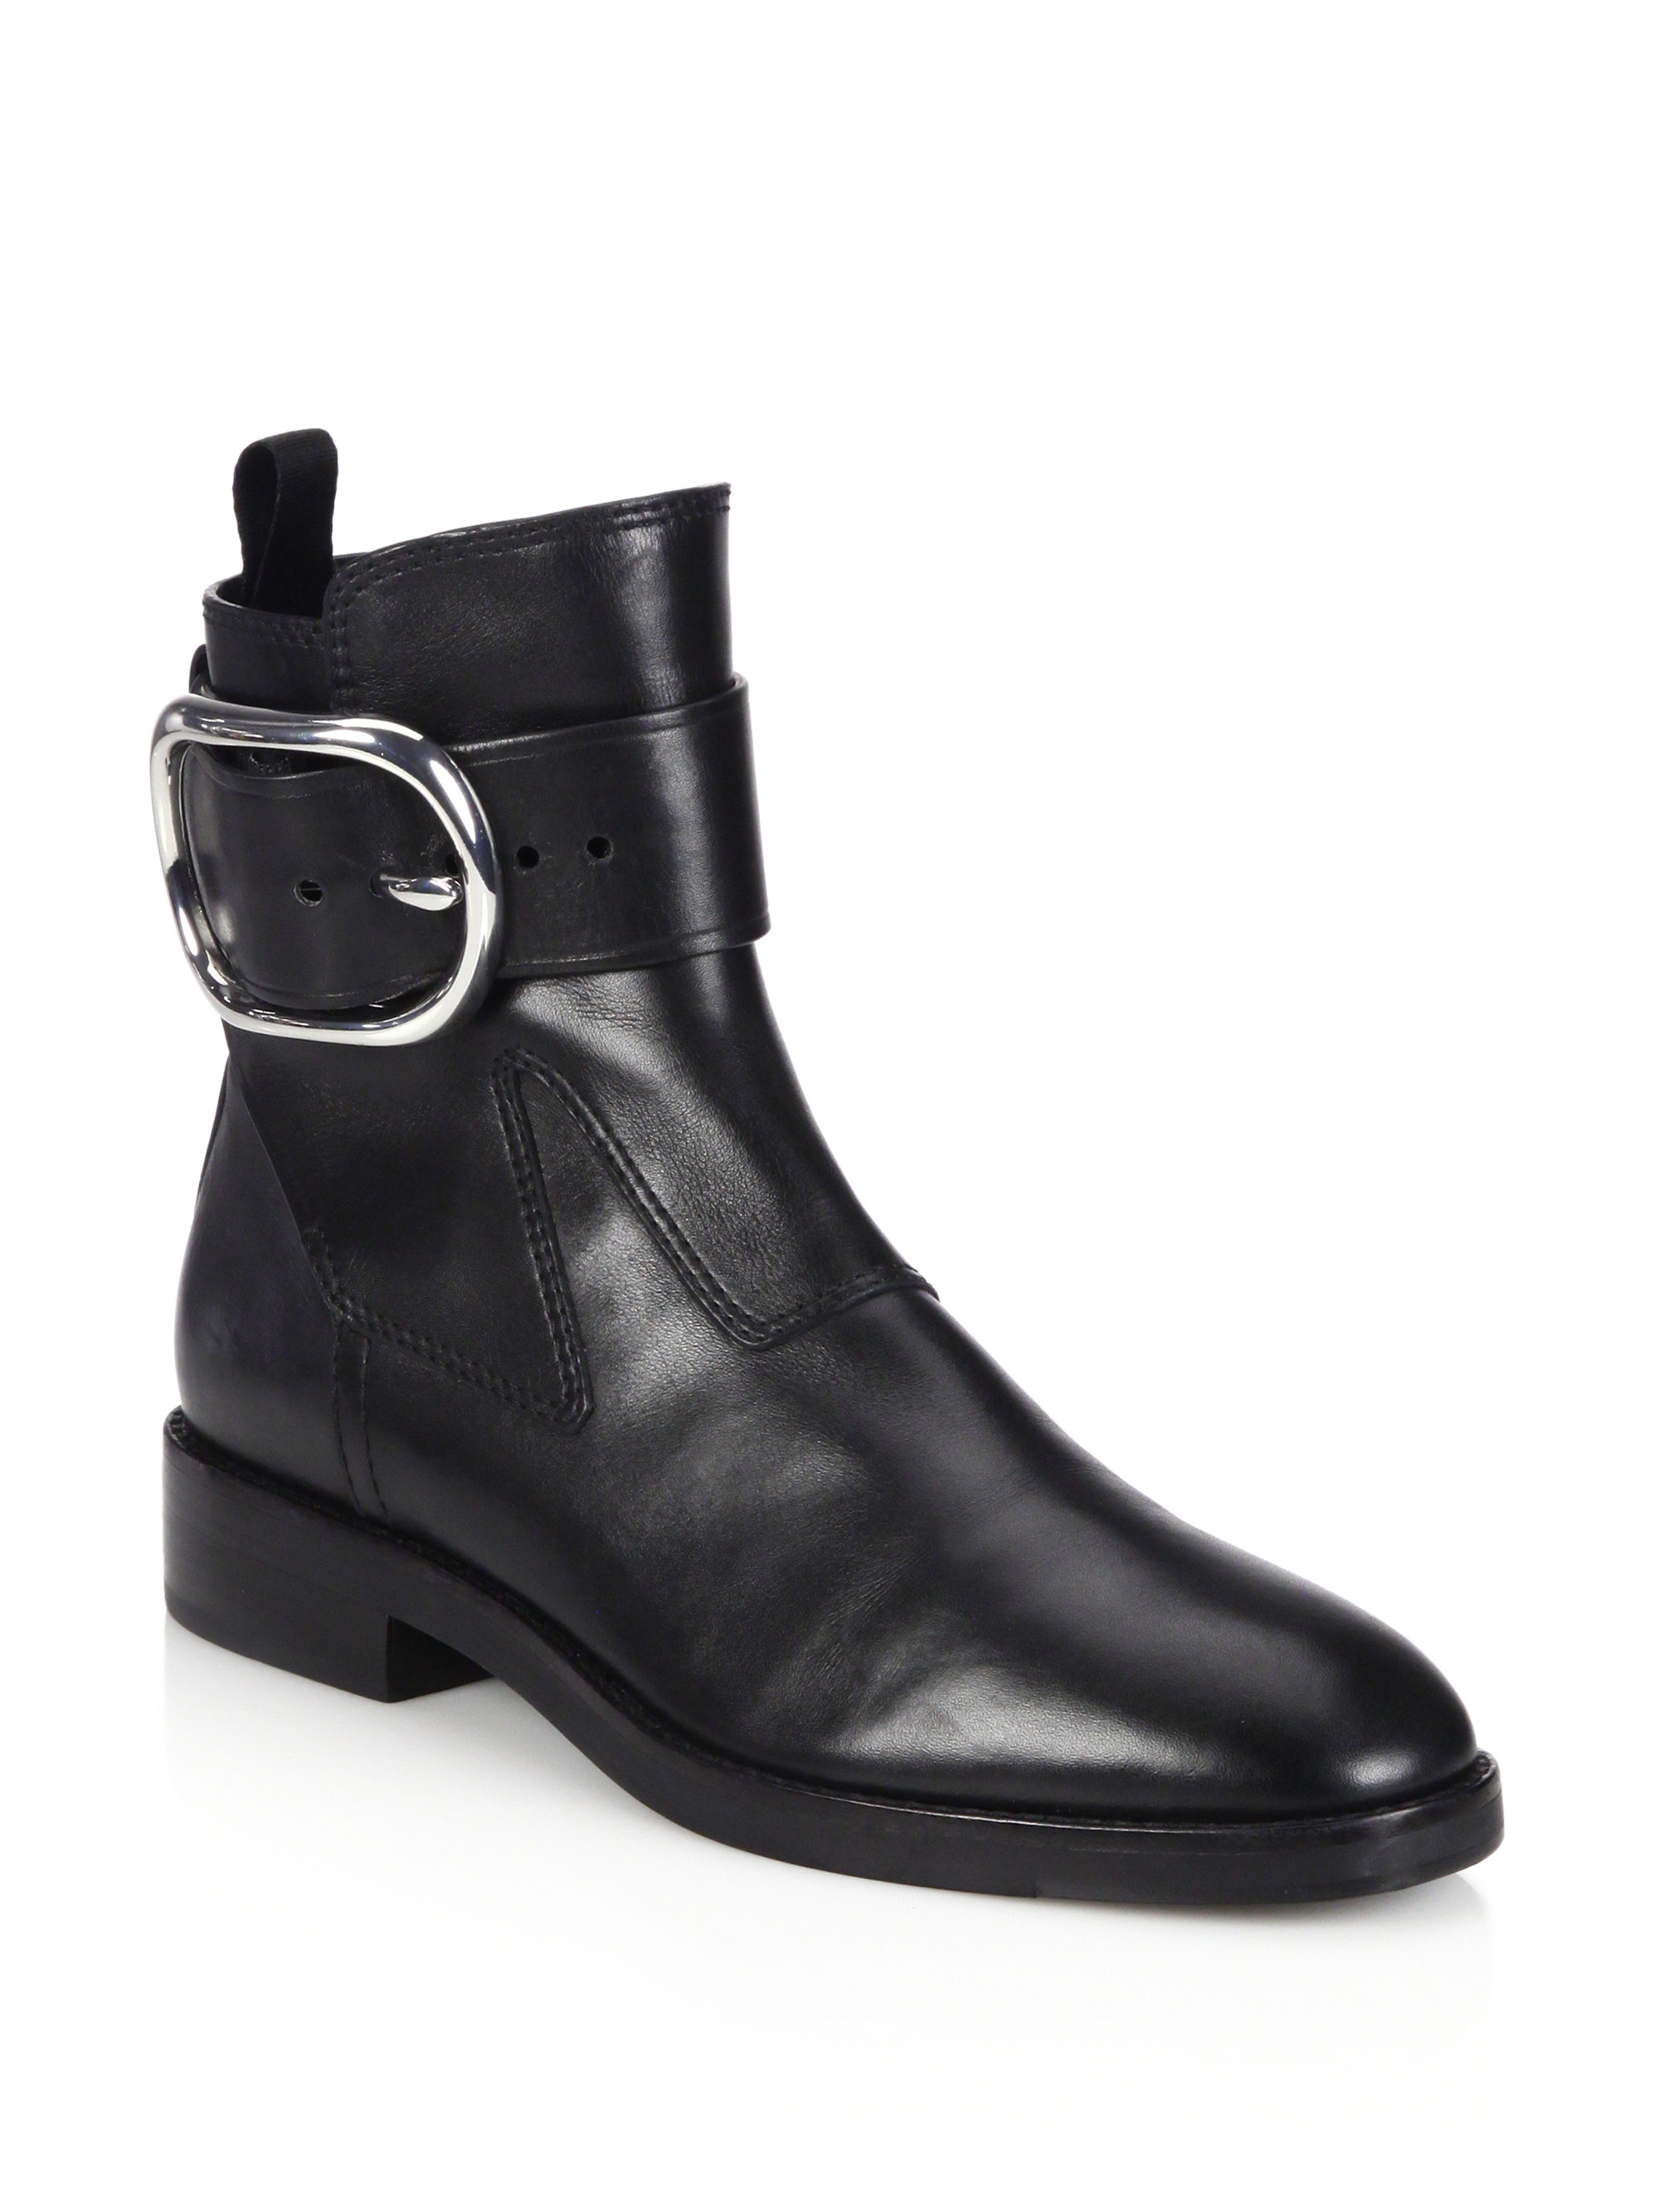 Lyst - Alexander Wang Bara Buckled Leather Ankle Boots in Black for Men